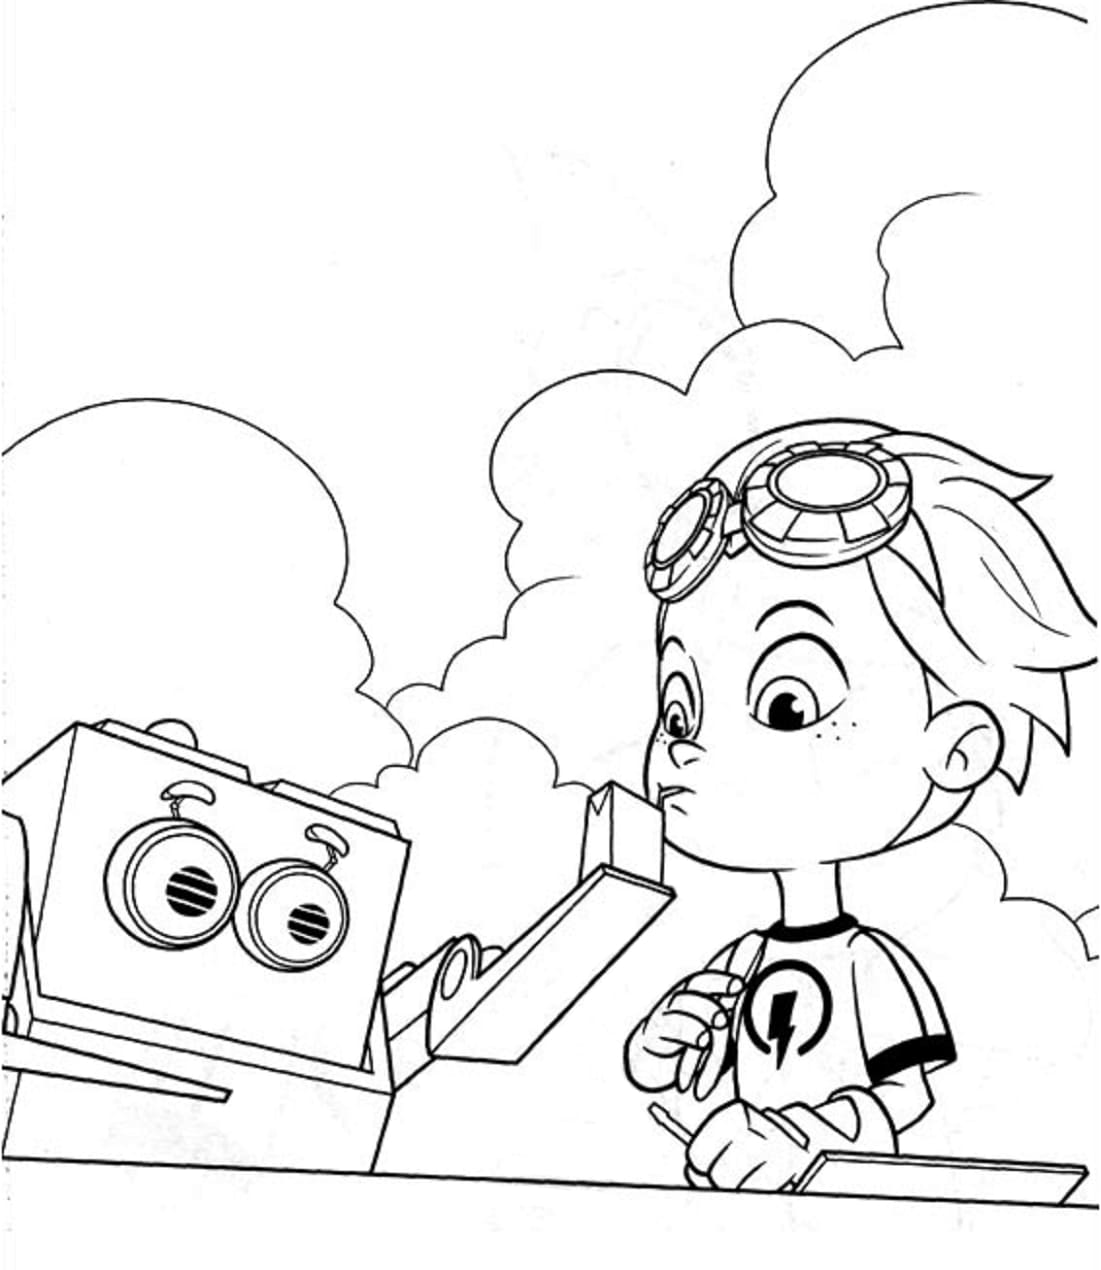 Rusty Rivets Jack et Rusty coloring page